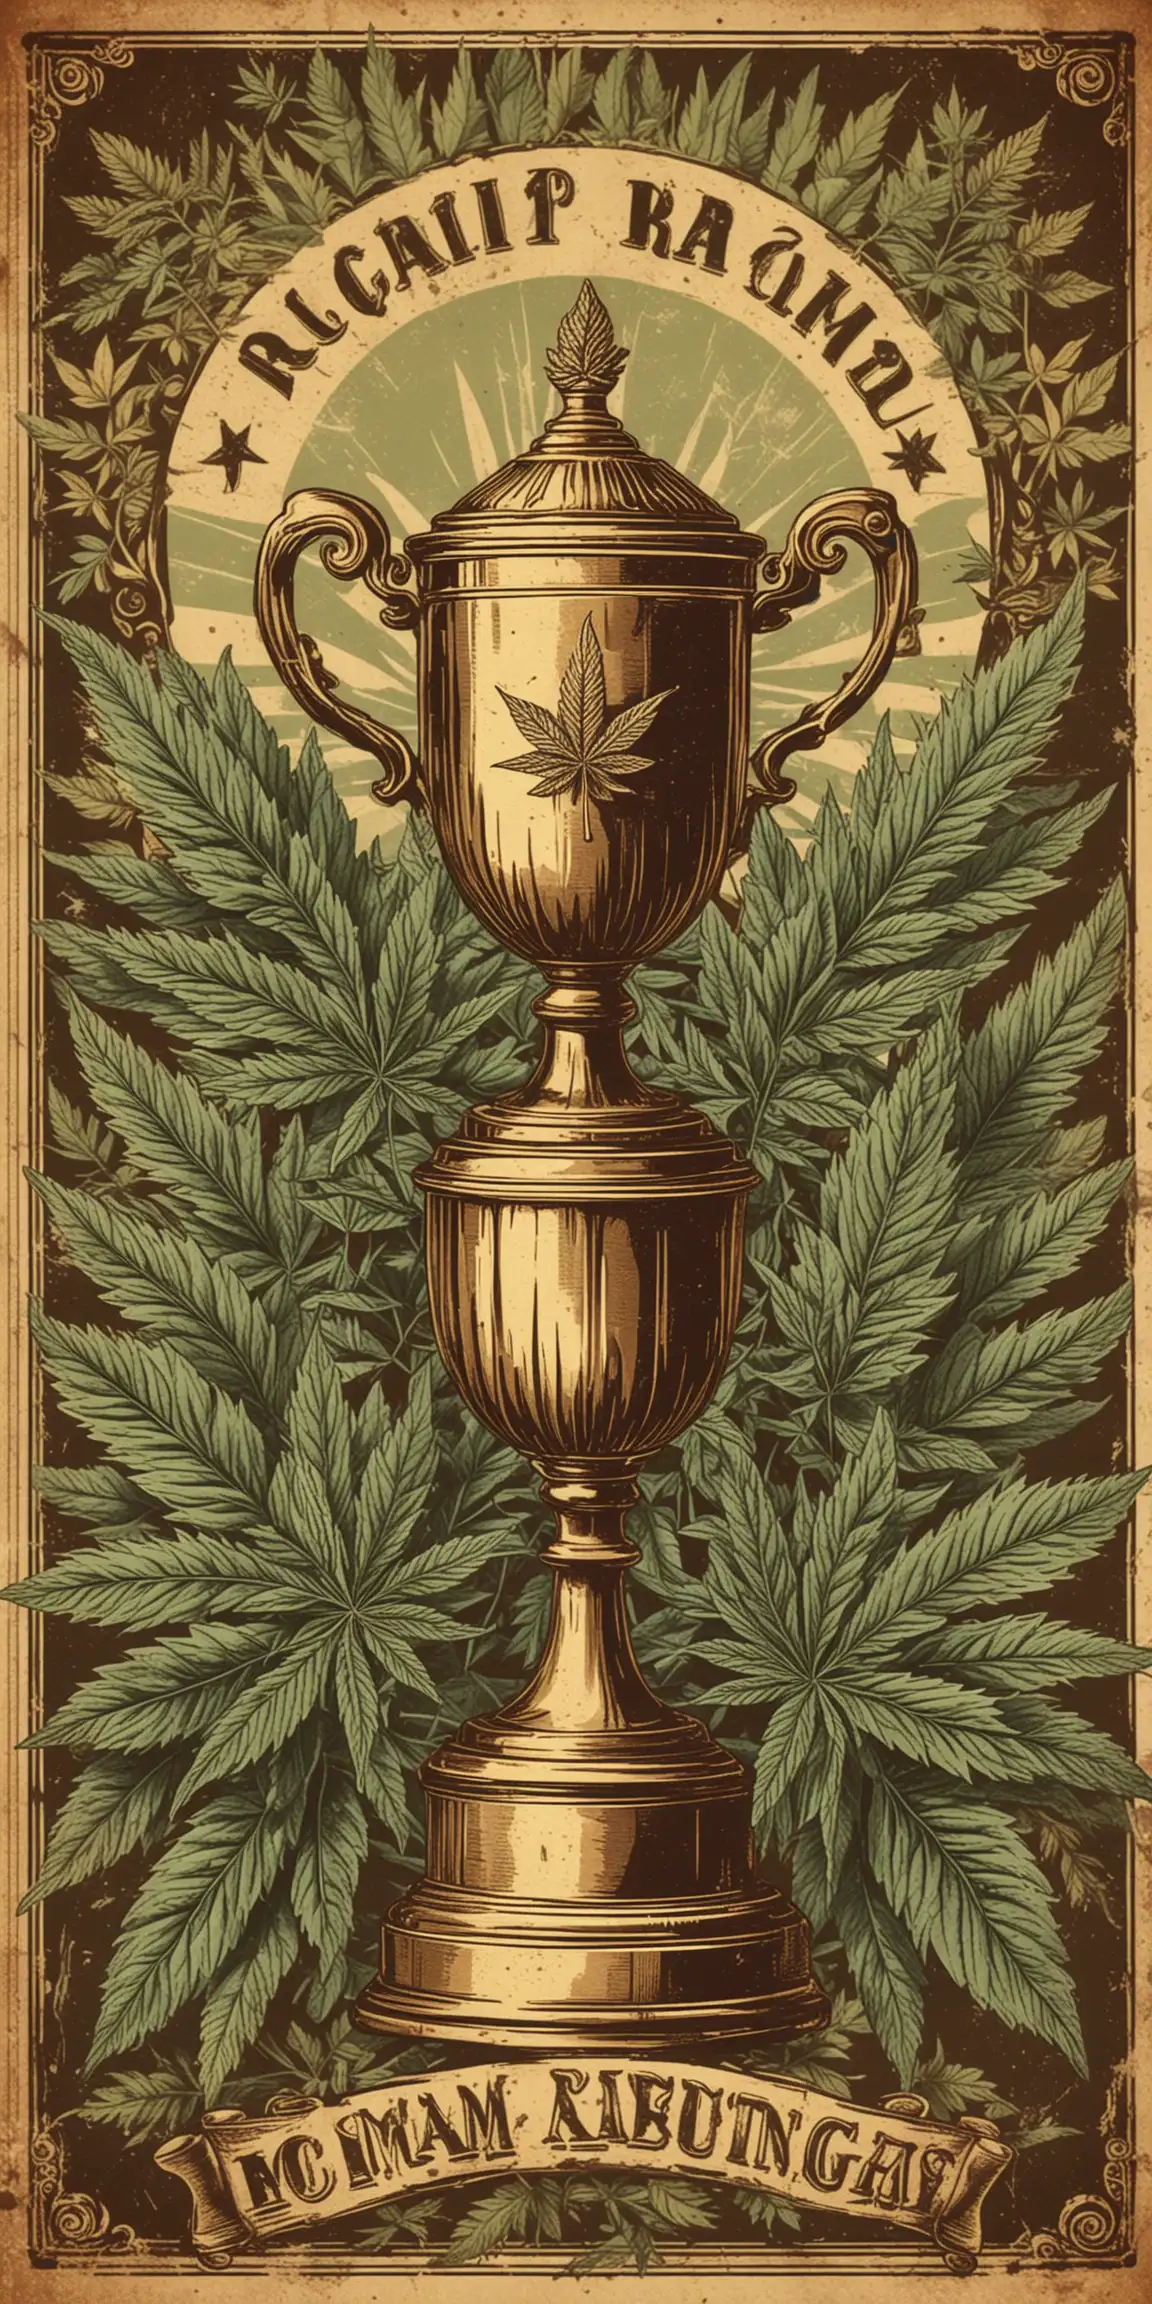 Vintage Race Themed Poster Illustration with Trophy and Cannabis Leaves